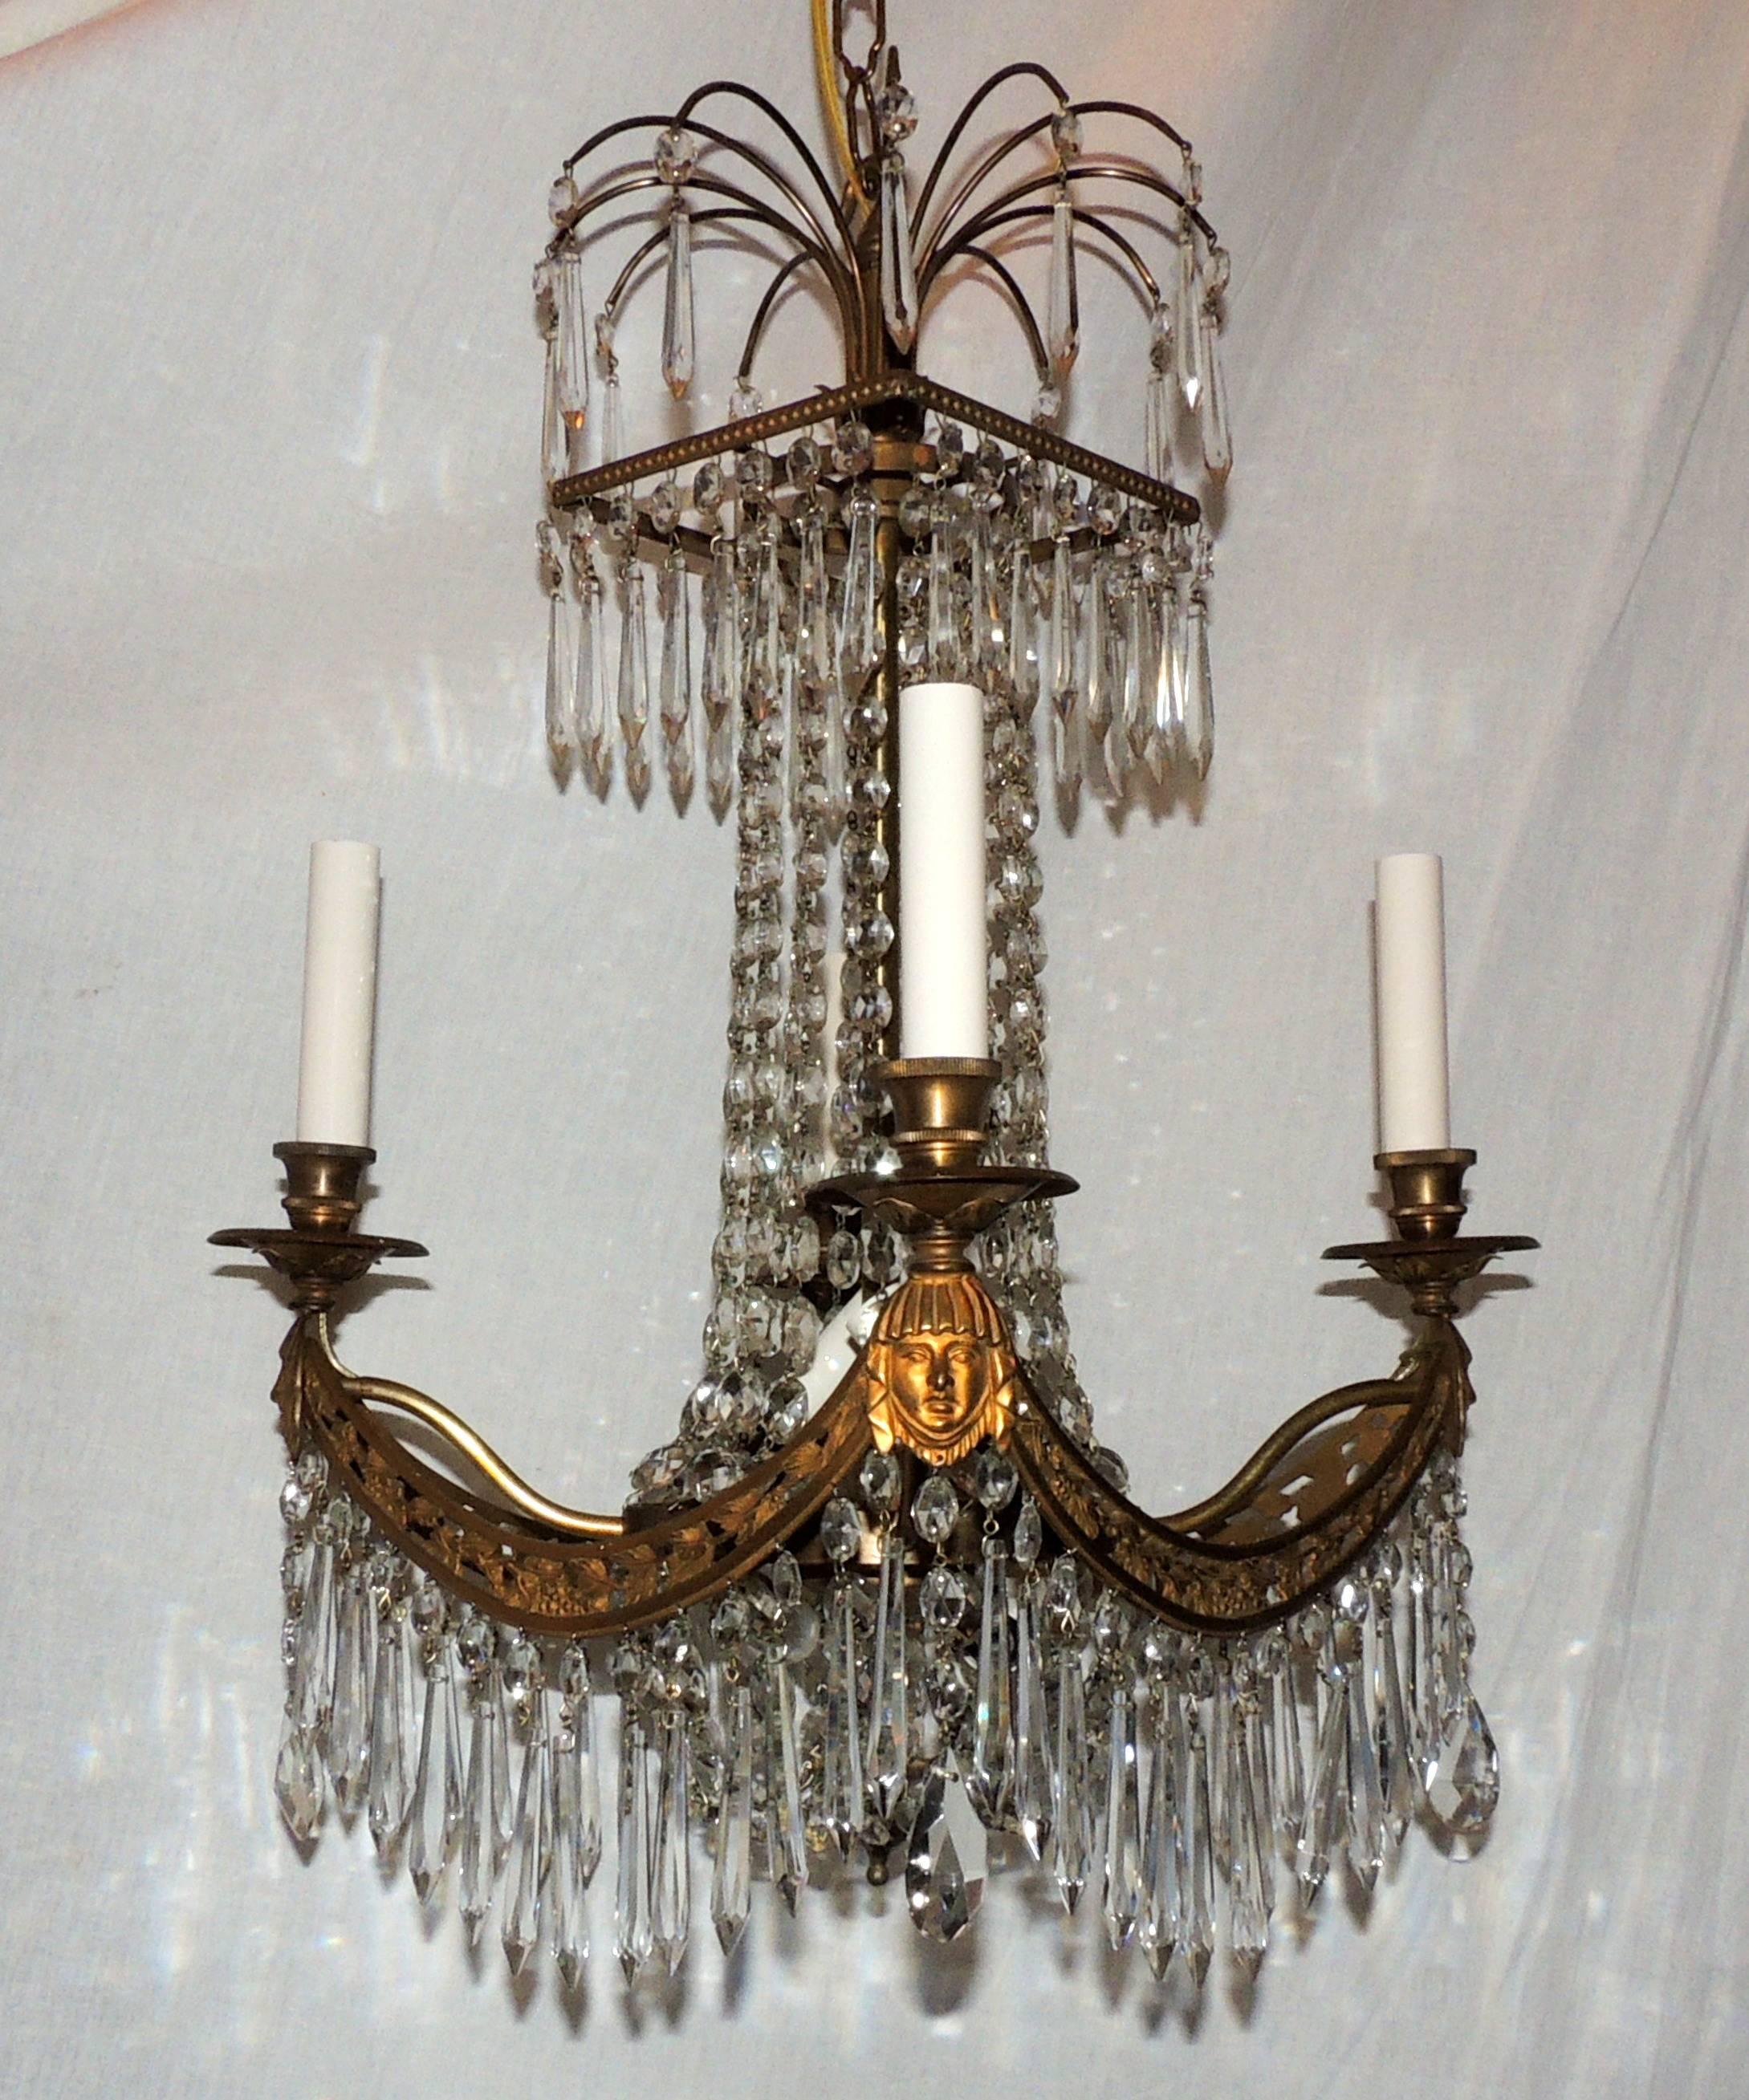 Fine French Bronze Neoclassical Baltic Empire Crystal Square Basket Chandelier  In Good Condition For Sale In Roslyn, NY